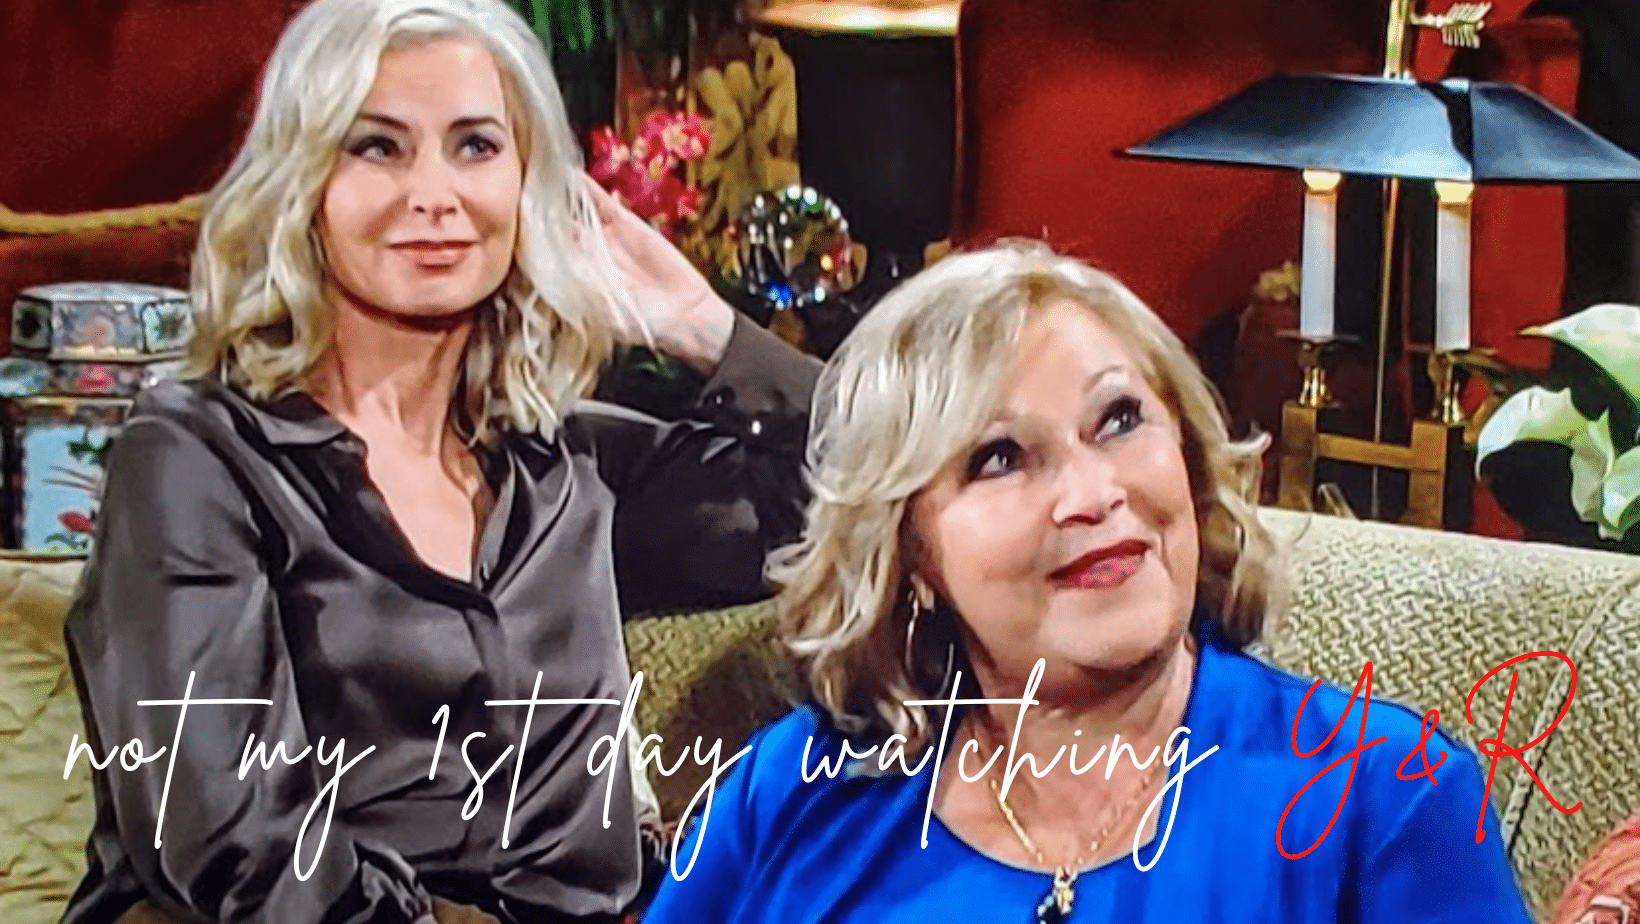 Ashley & Traci Abbott on The Young & the Restless celebrate 40 years.